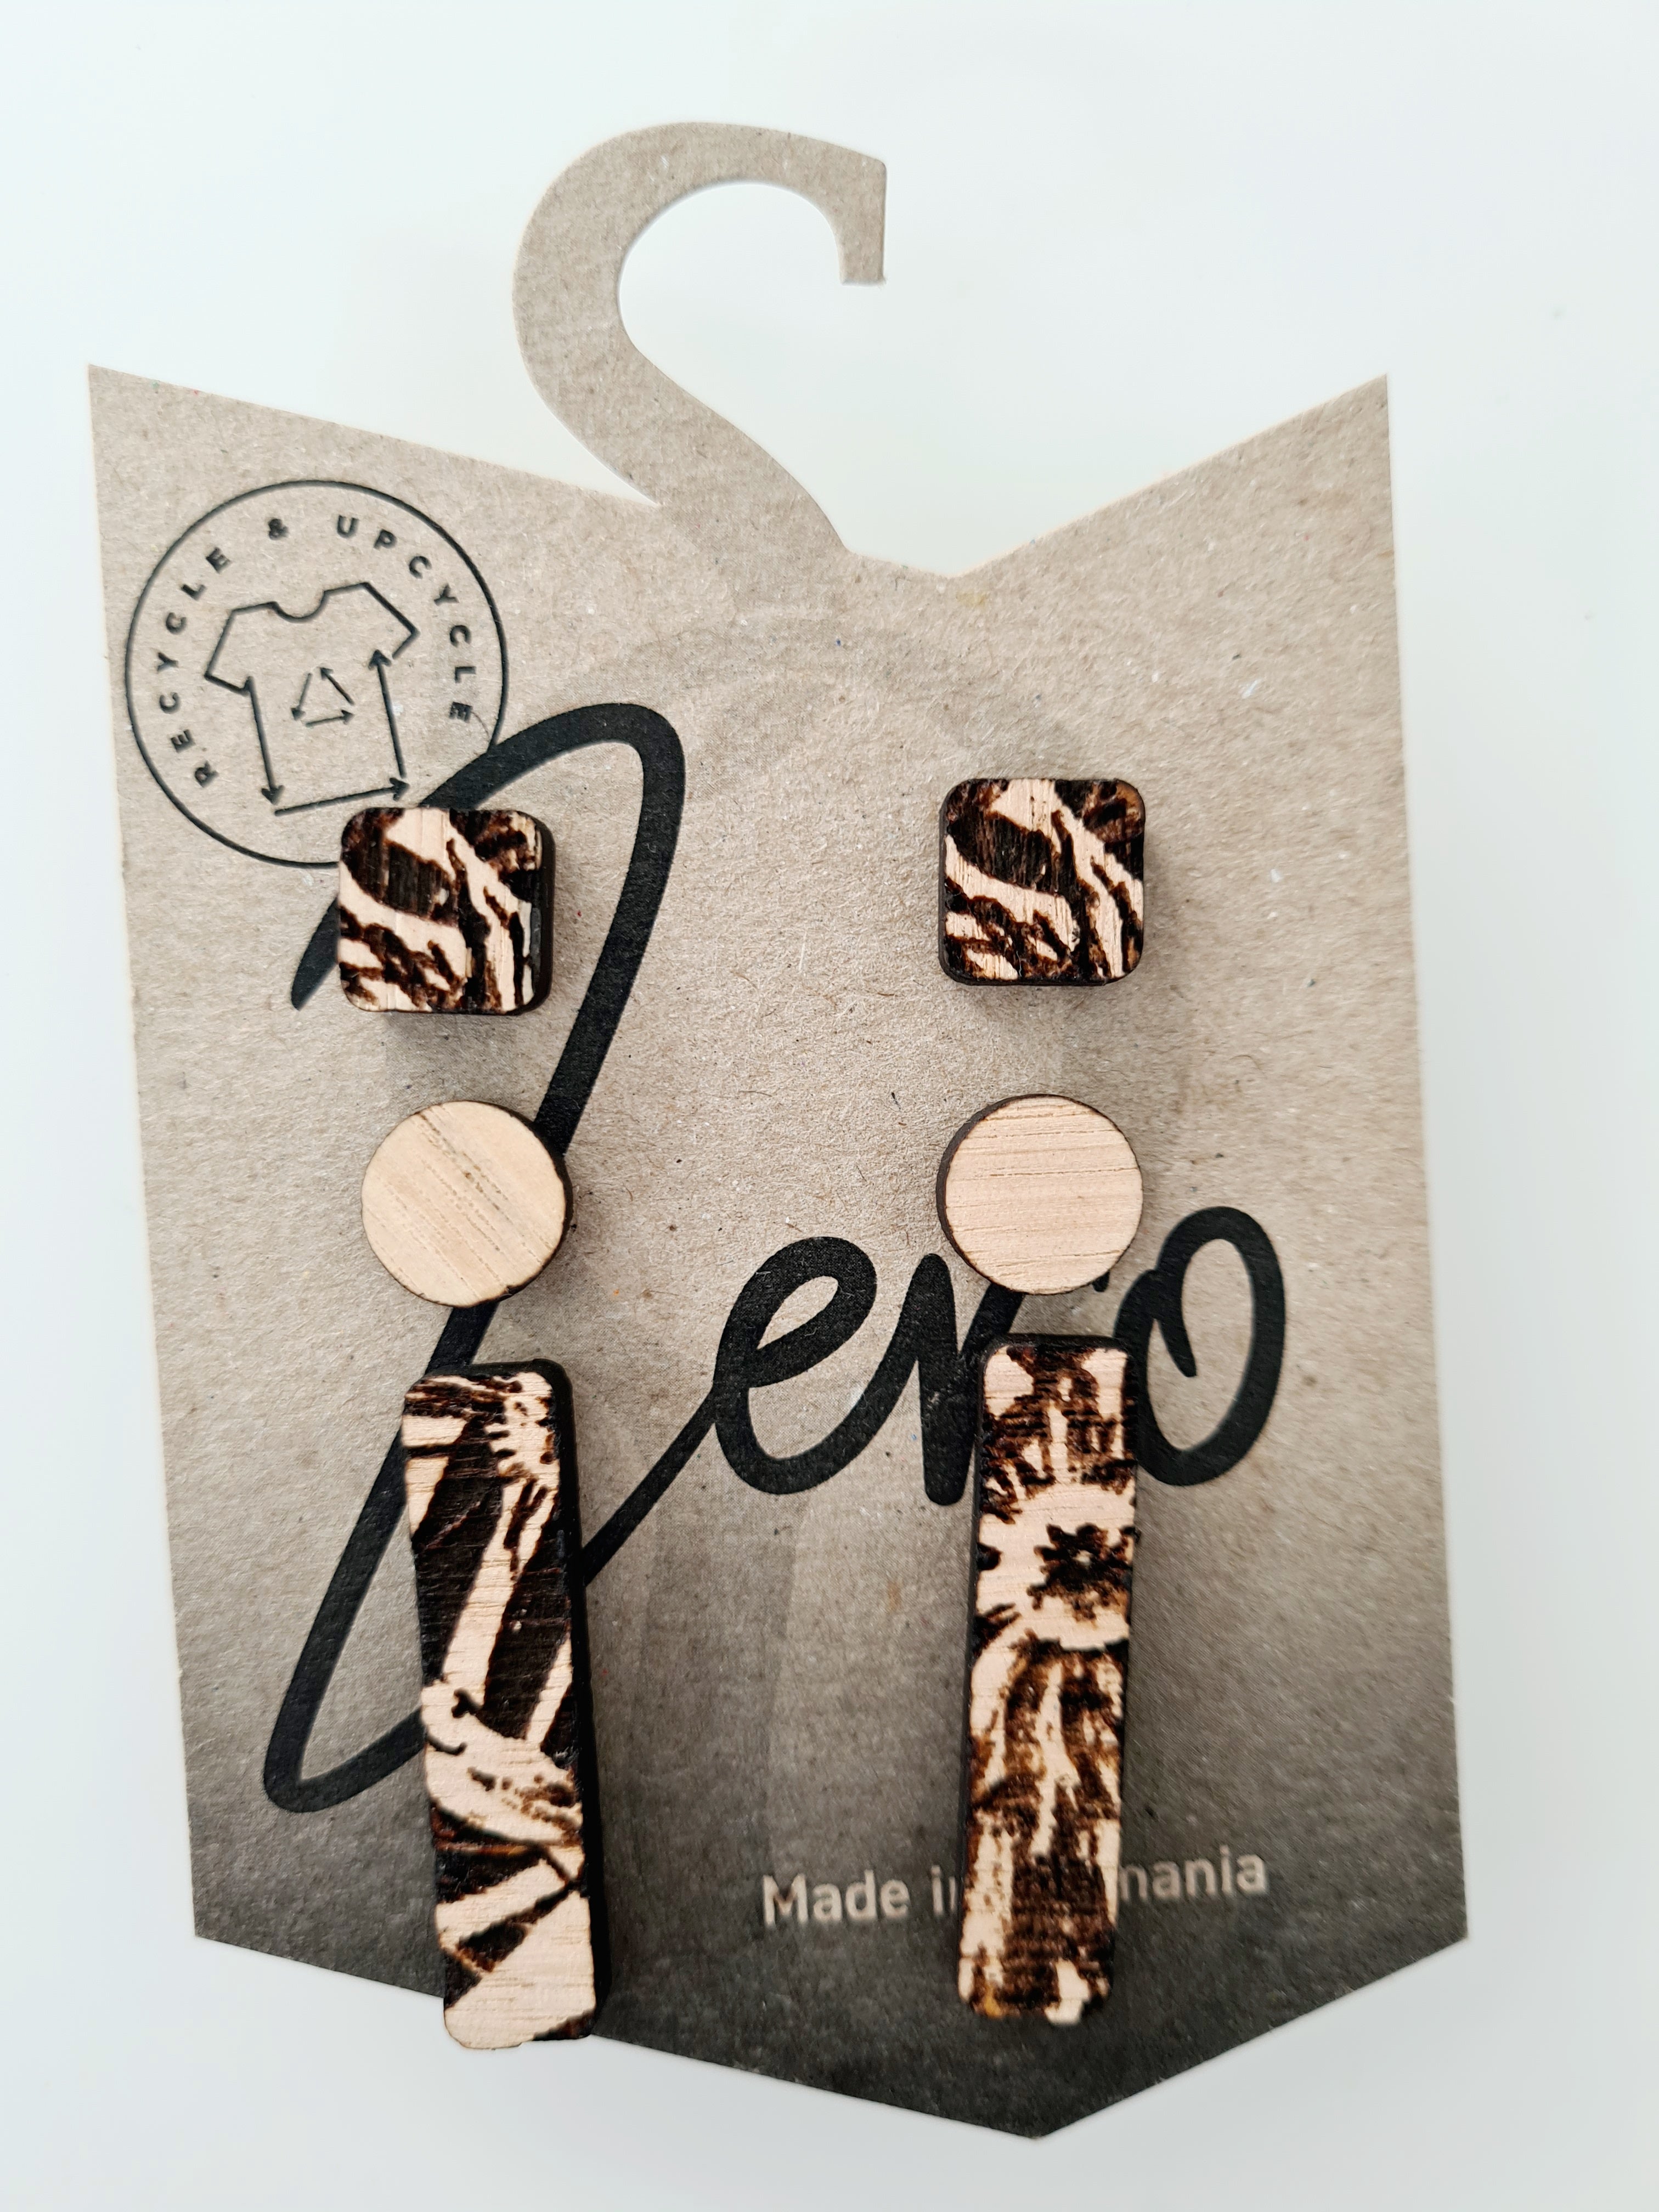 Tasmanian Oak Etched Earrings - Zero Waste Earrings The Spotted Quoll Studs Trio Gift Pack 